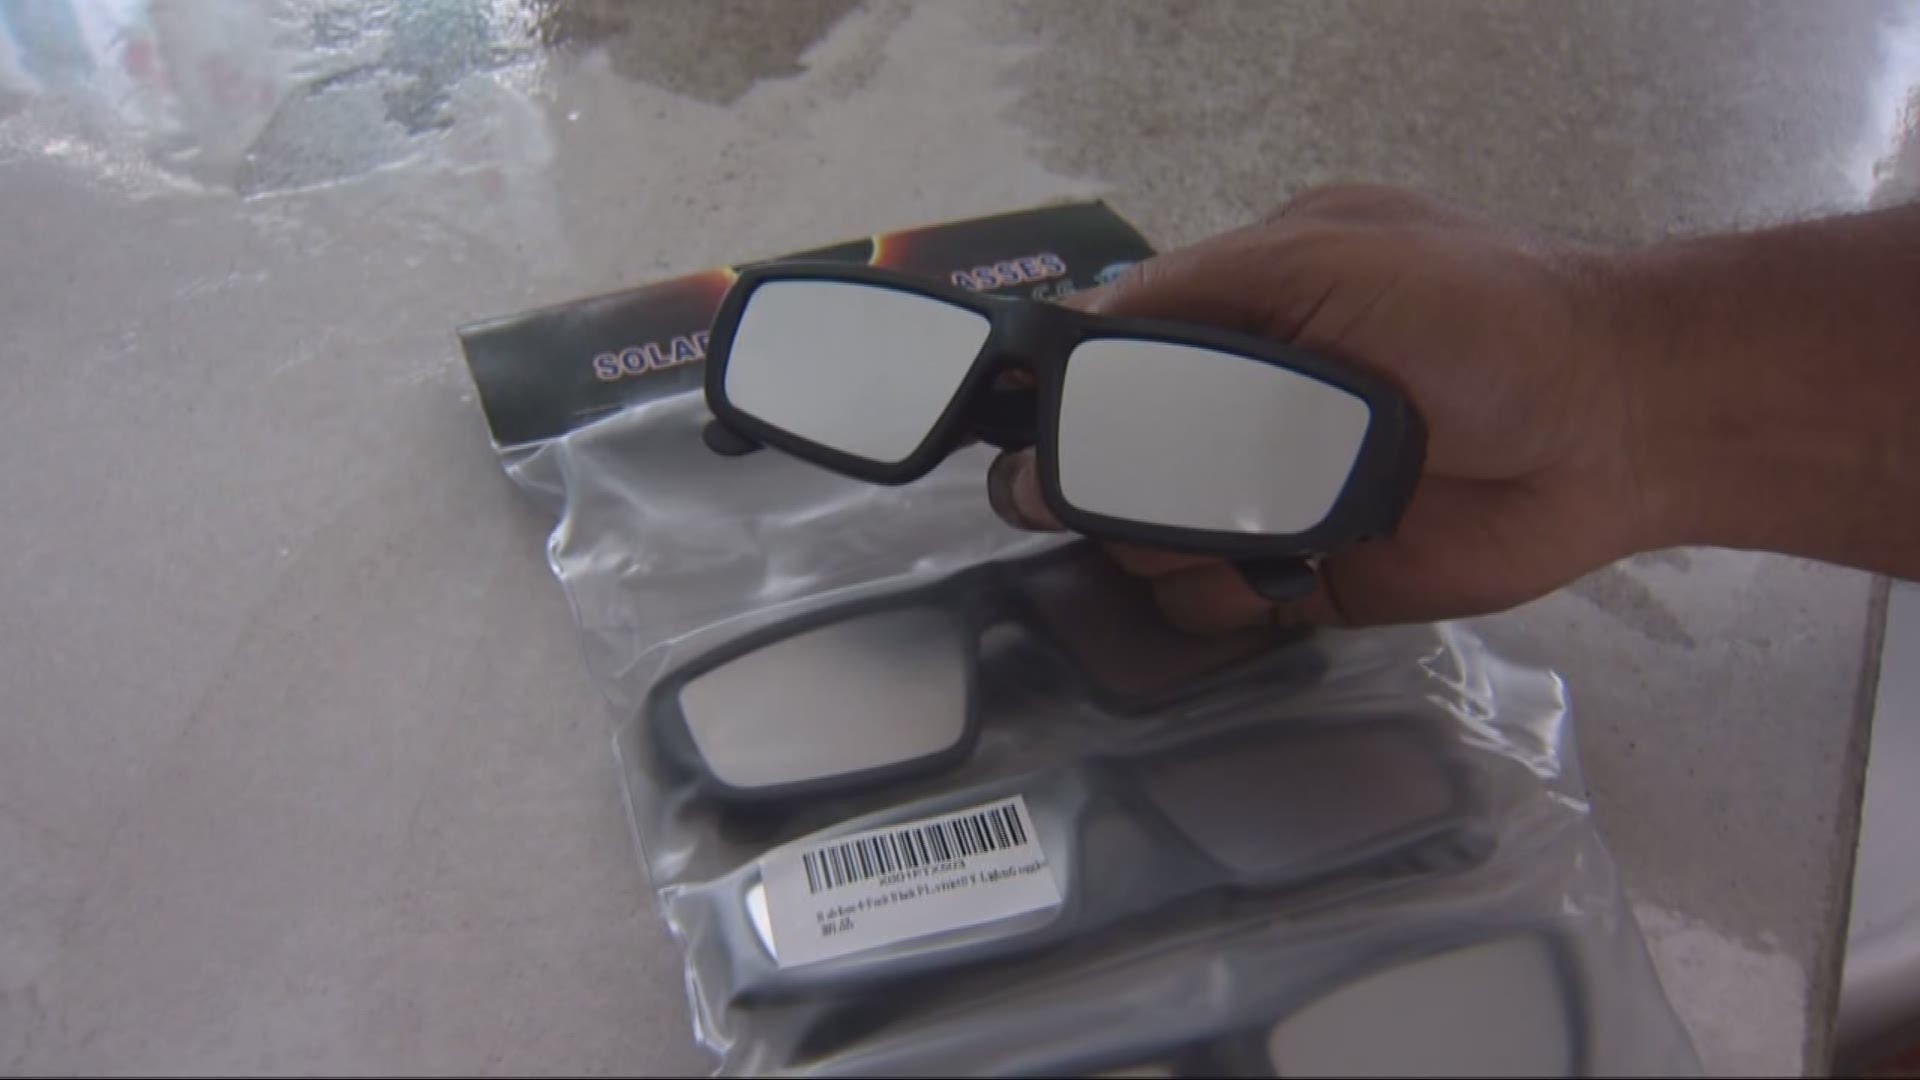 Amazon issues recall for some eclipse glasses